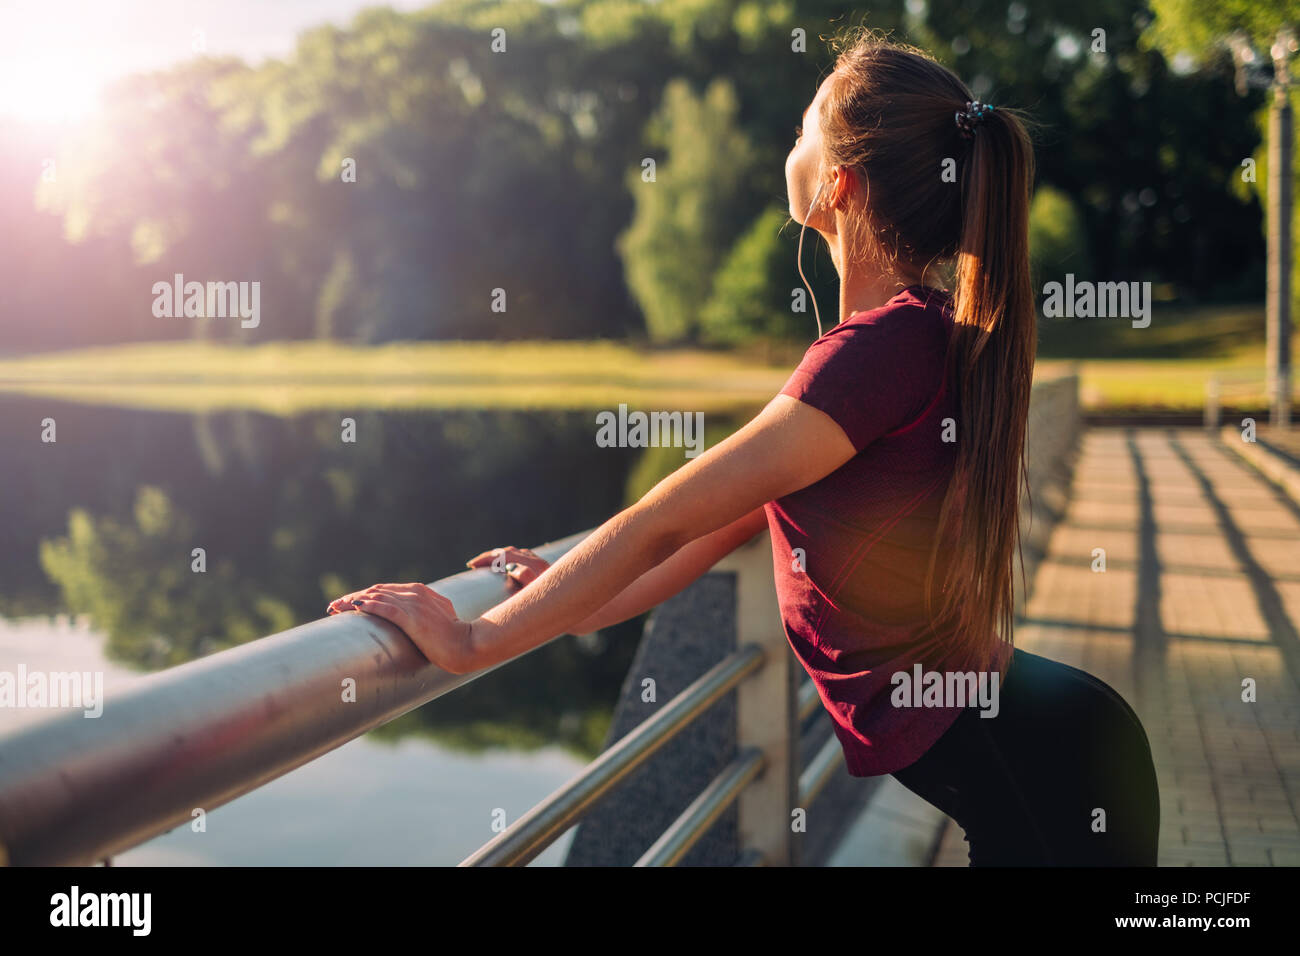 Jogger leaning against a railing listening to music Stock Photo